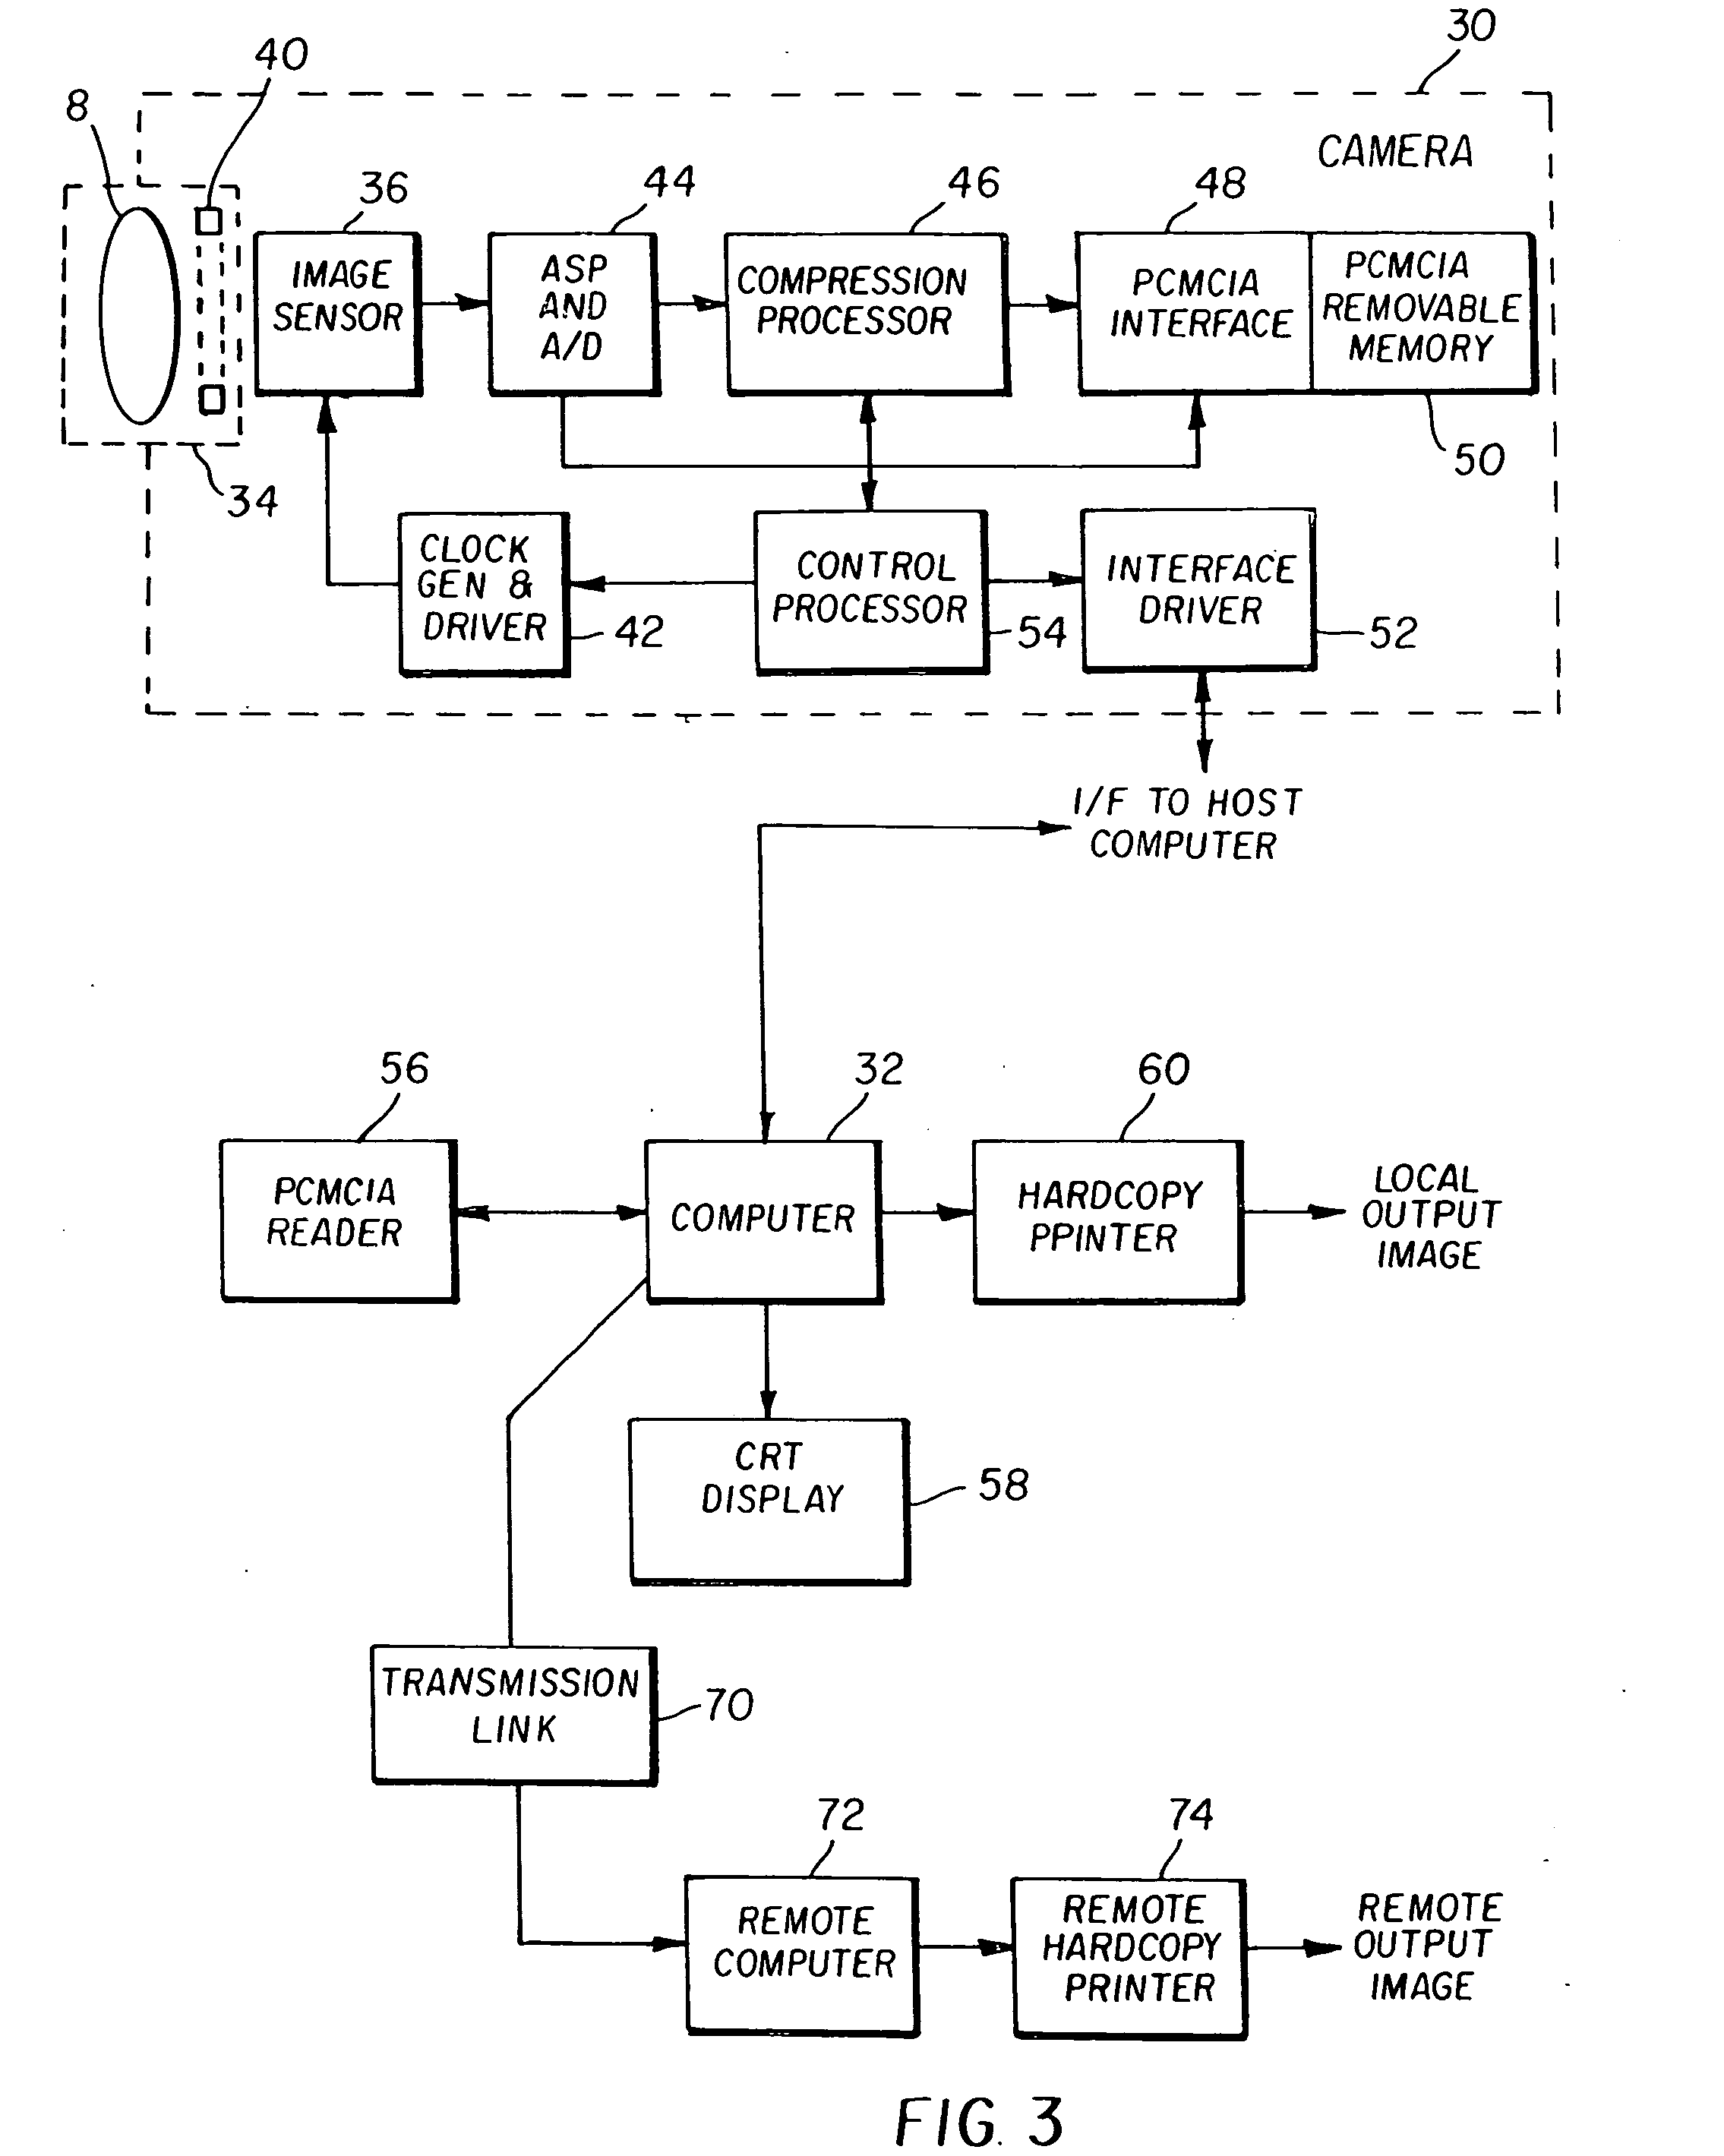 Digital imaging system and file format providing raw and processed image data